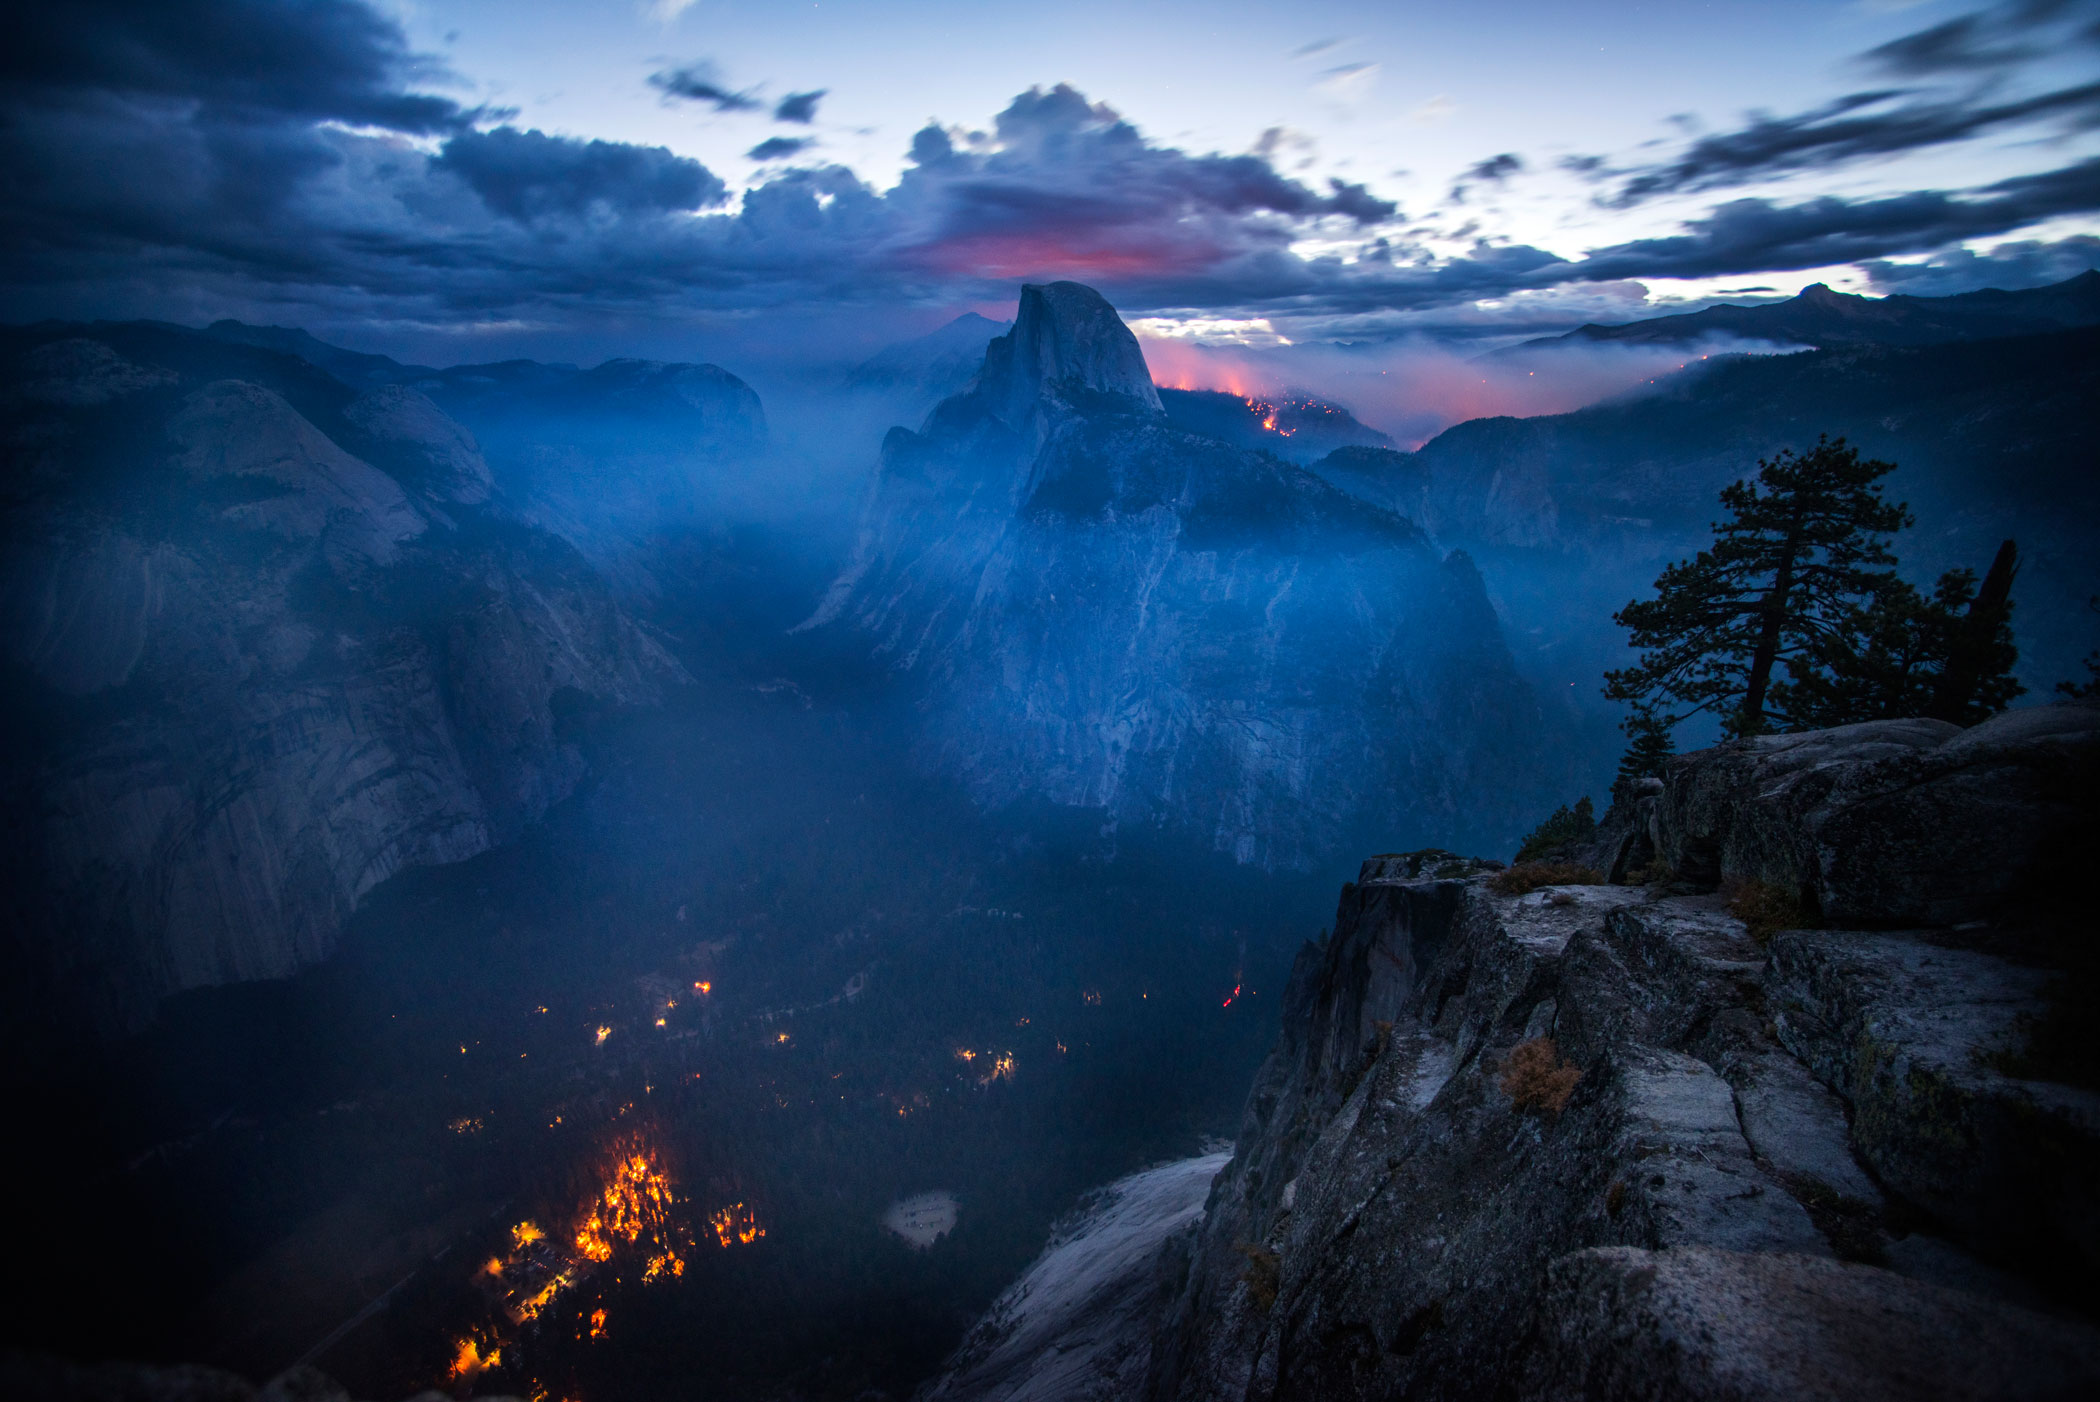 The Meadow Fire burns at dawn near Half Dome in Yosemite National Park early Monday September 8, 2014. As of Wednesday the fire had burned over 4,500 acres and was 10% contained.